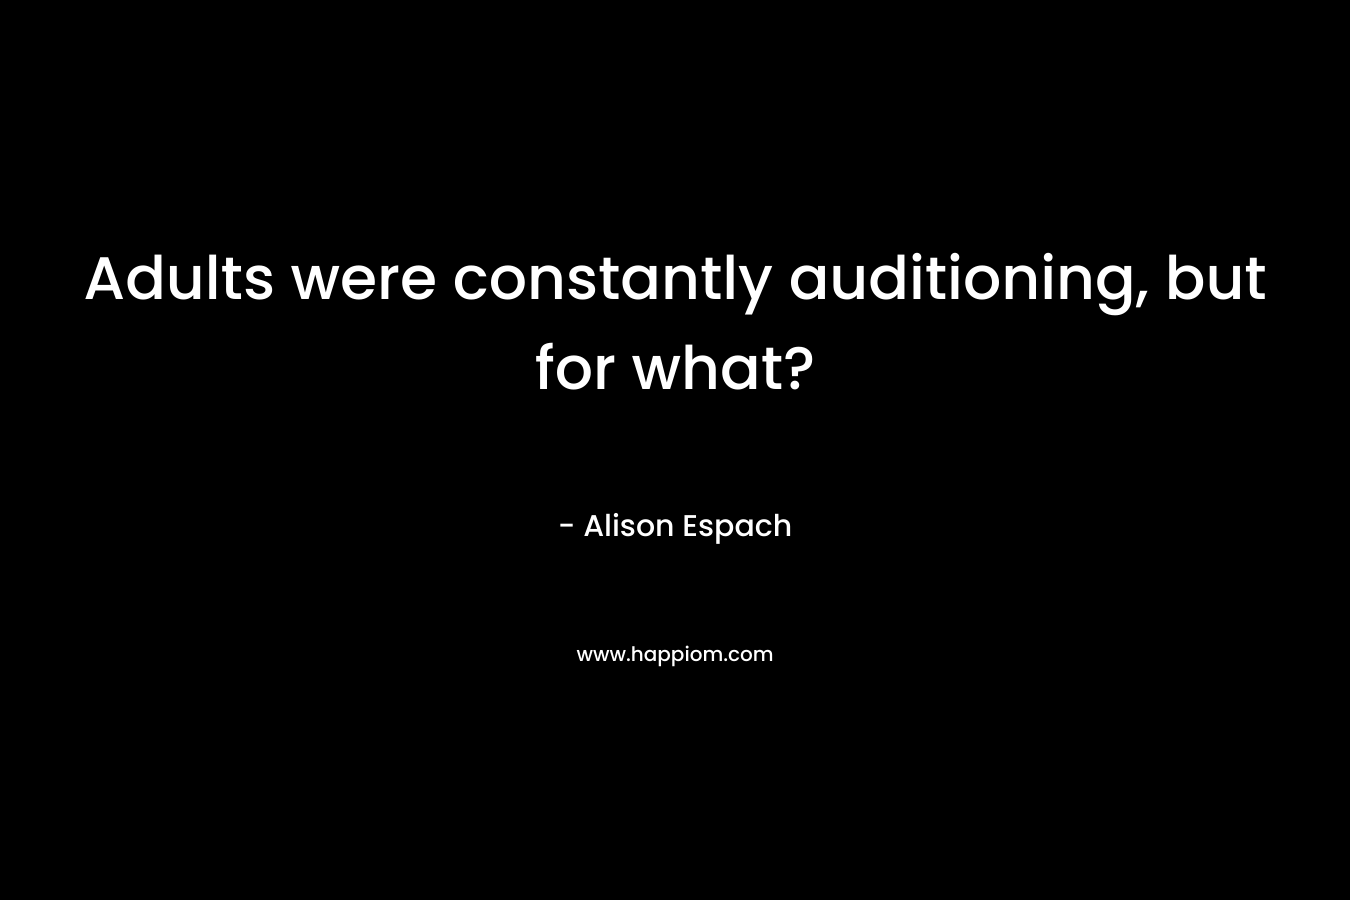 Adults were constantly auditioning, but for what? – Alison Espach